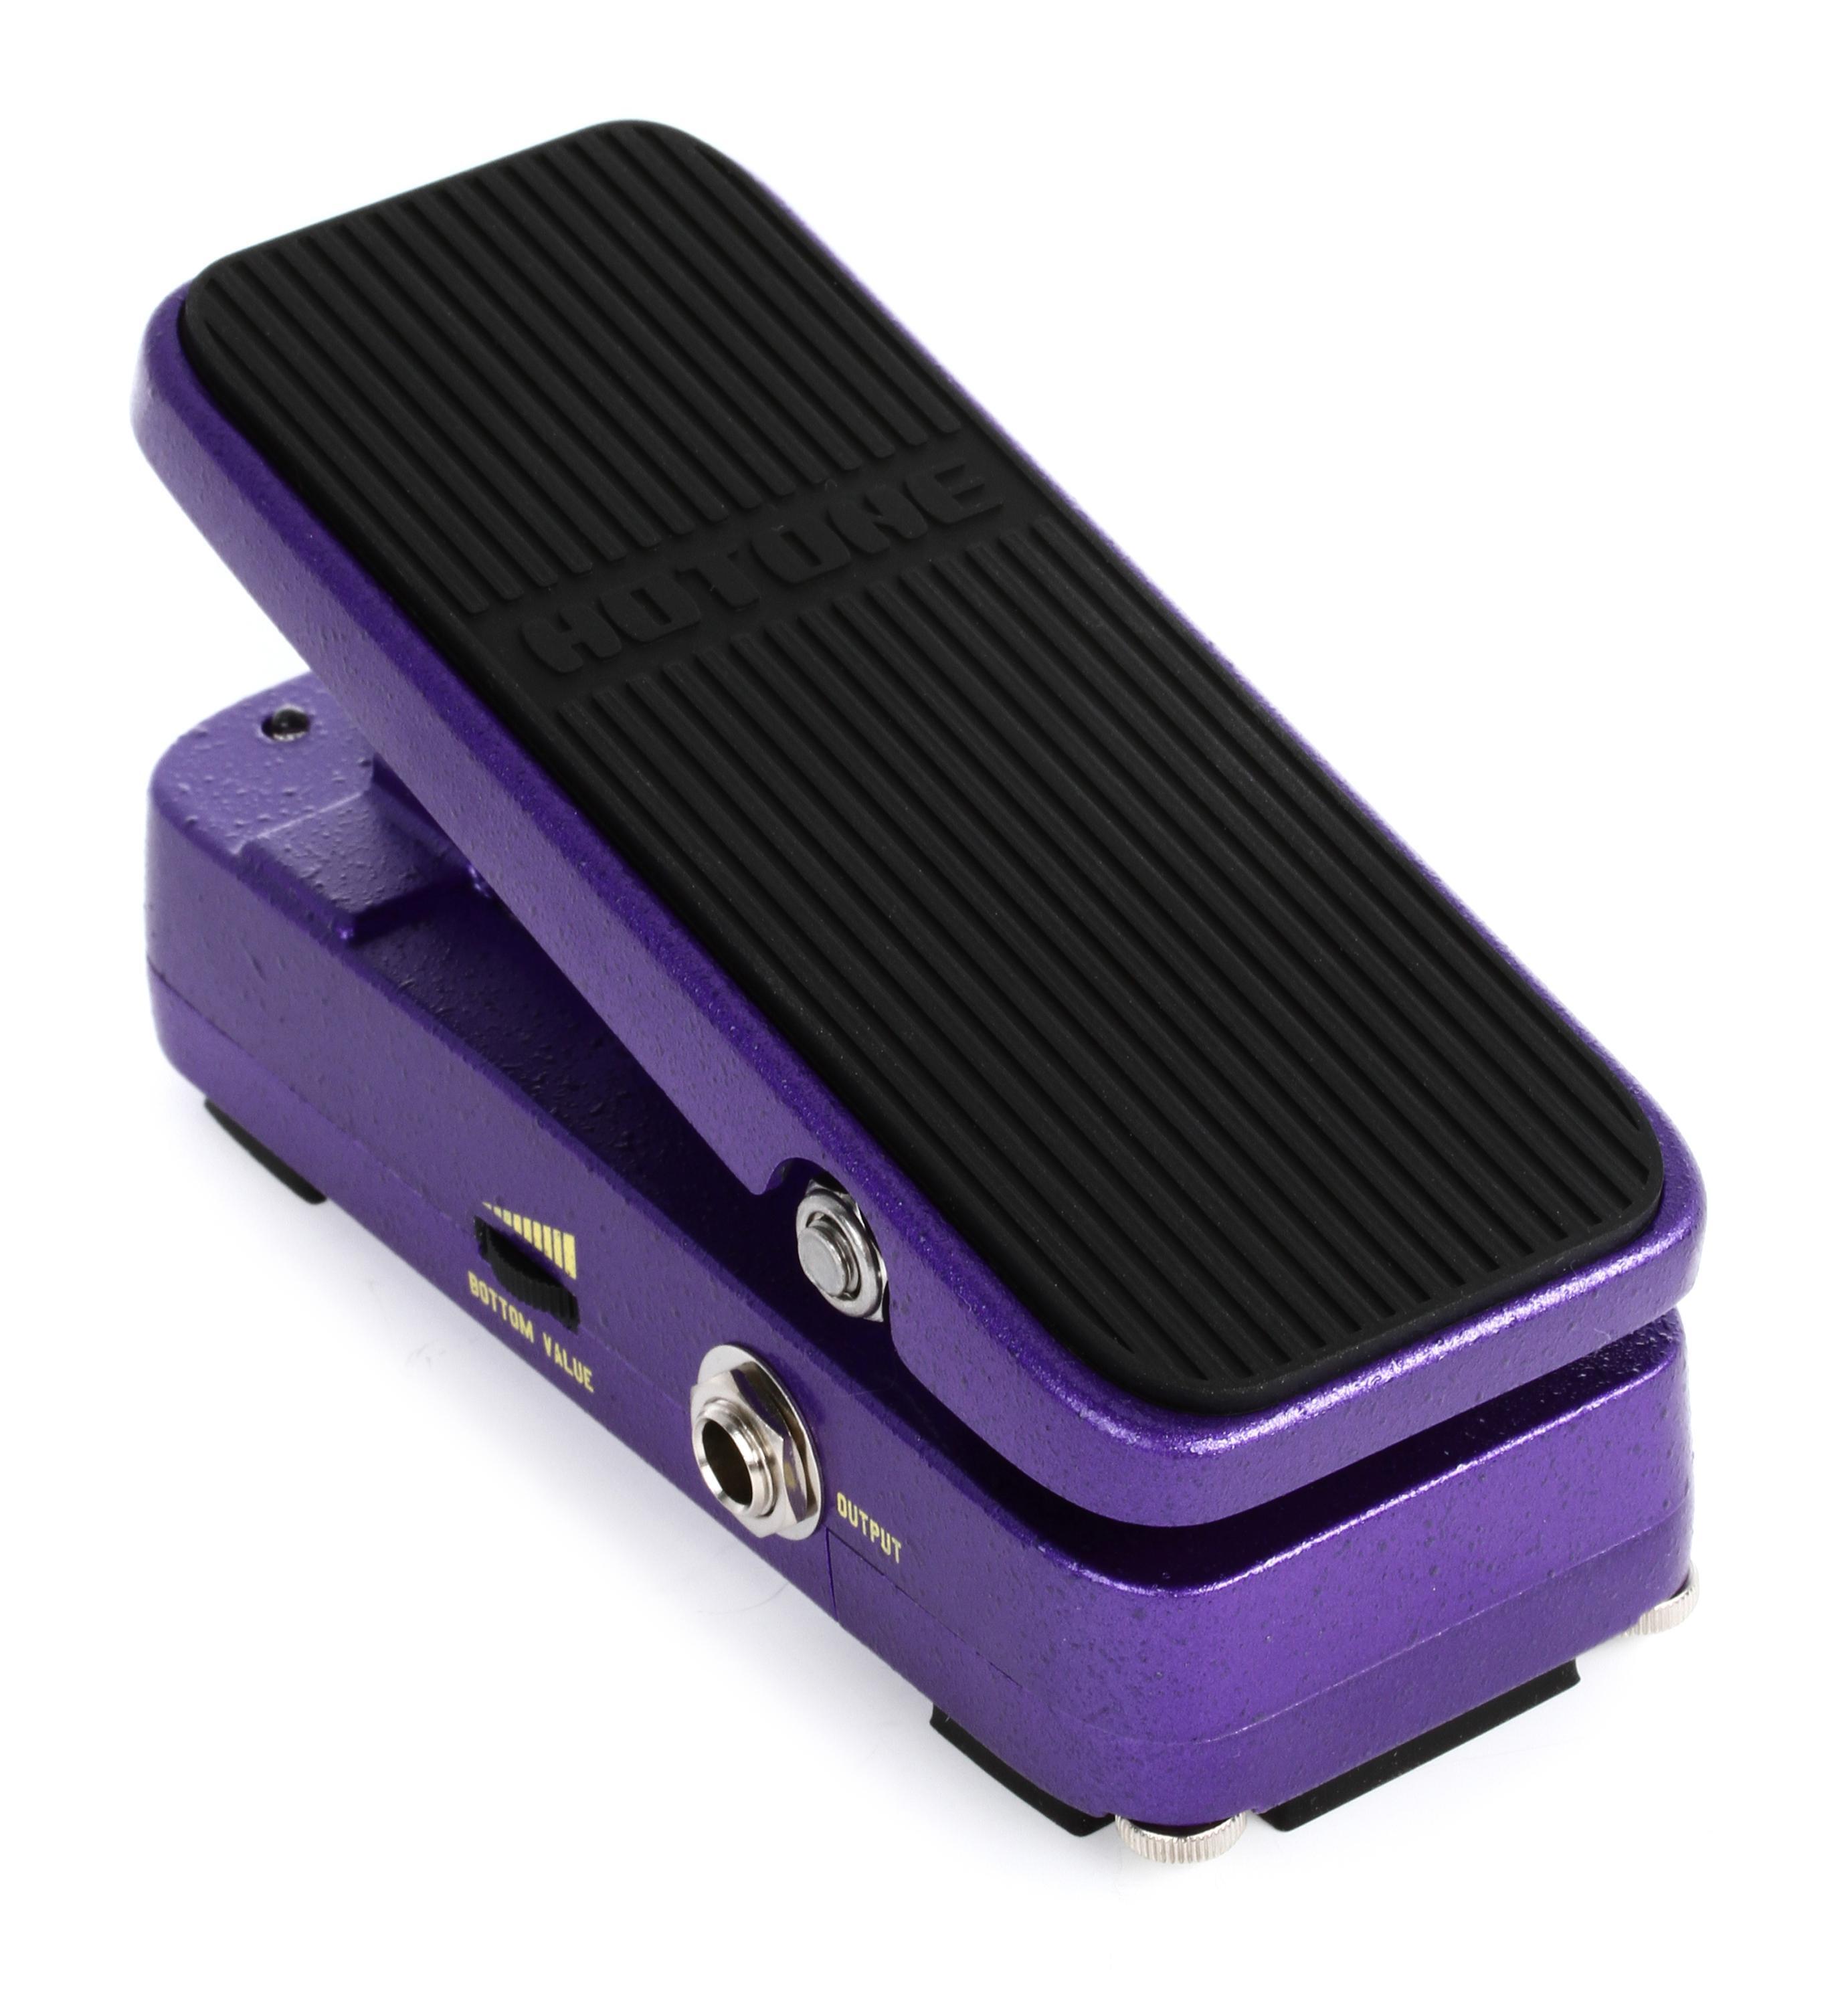 Hotone Vow Press Volume/Wah Pedal | Sweetwater